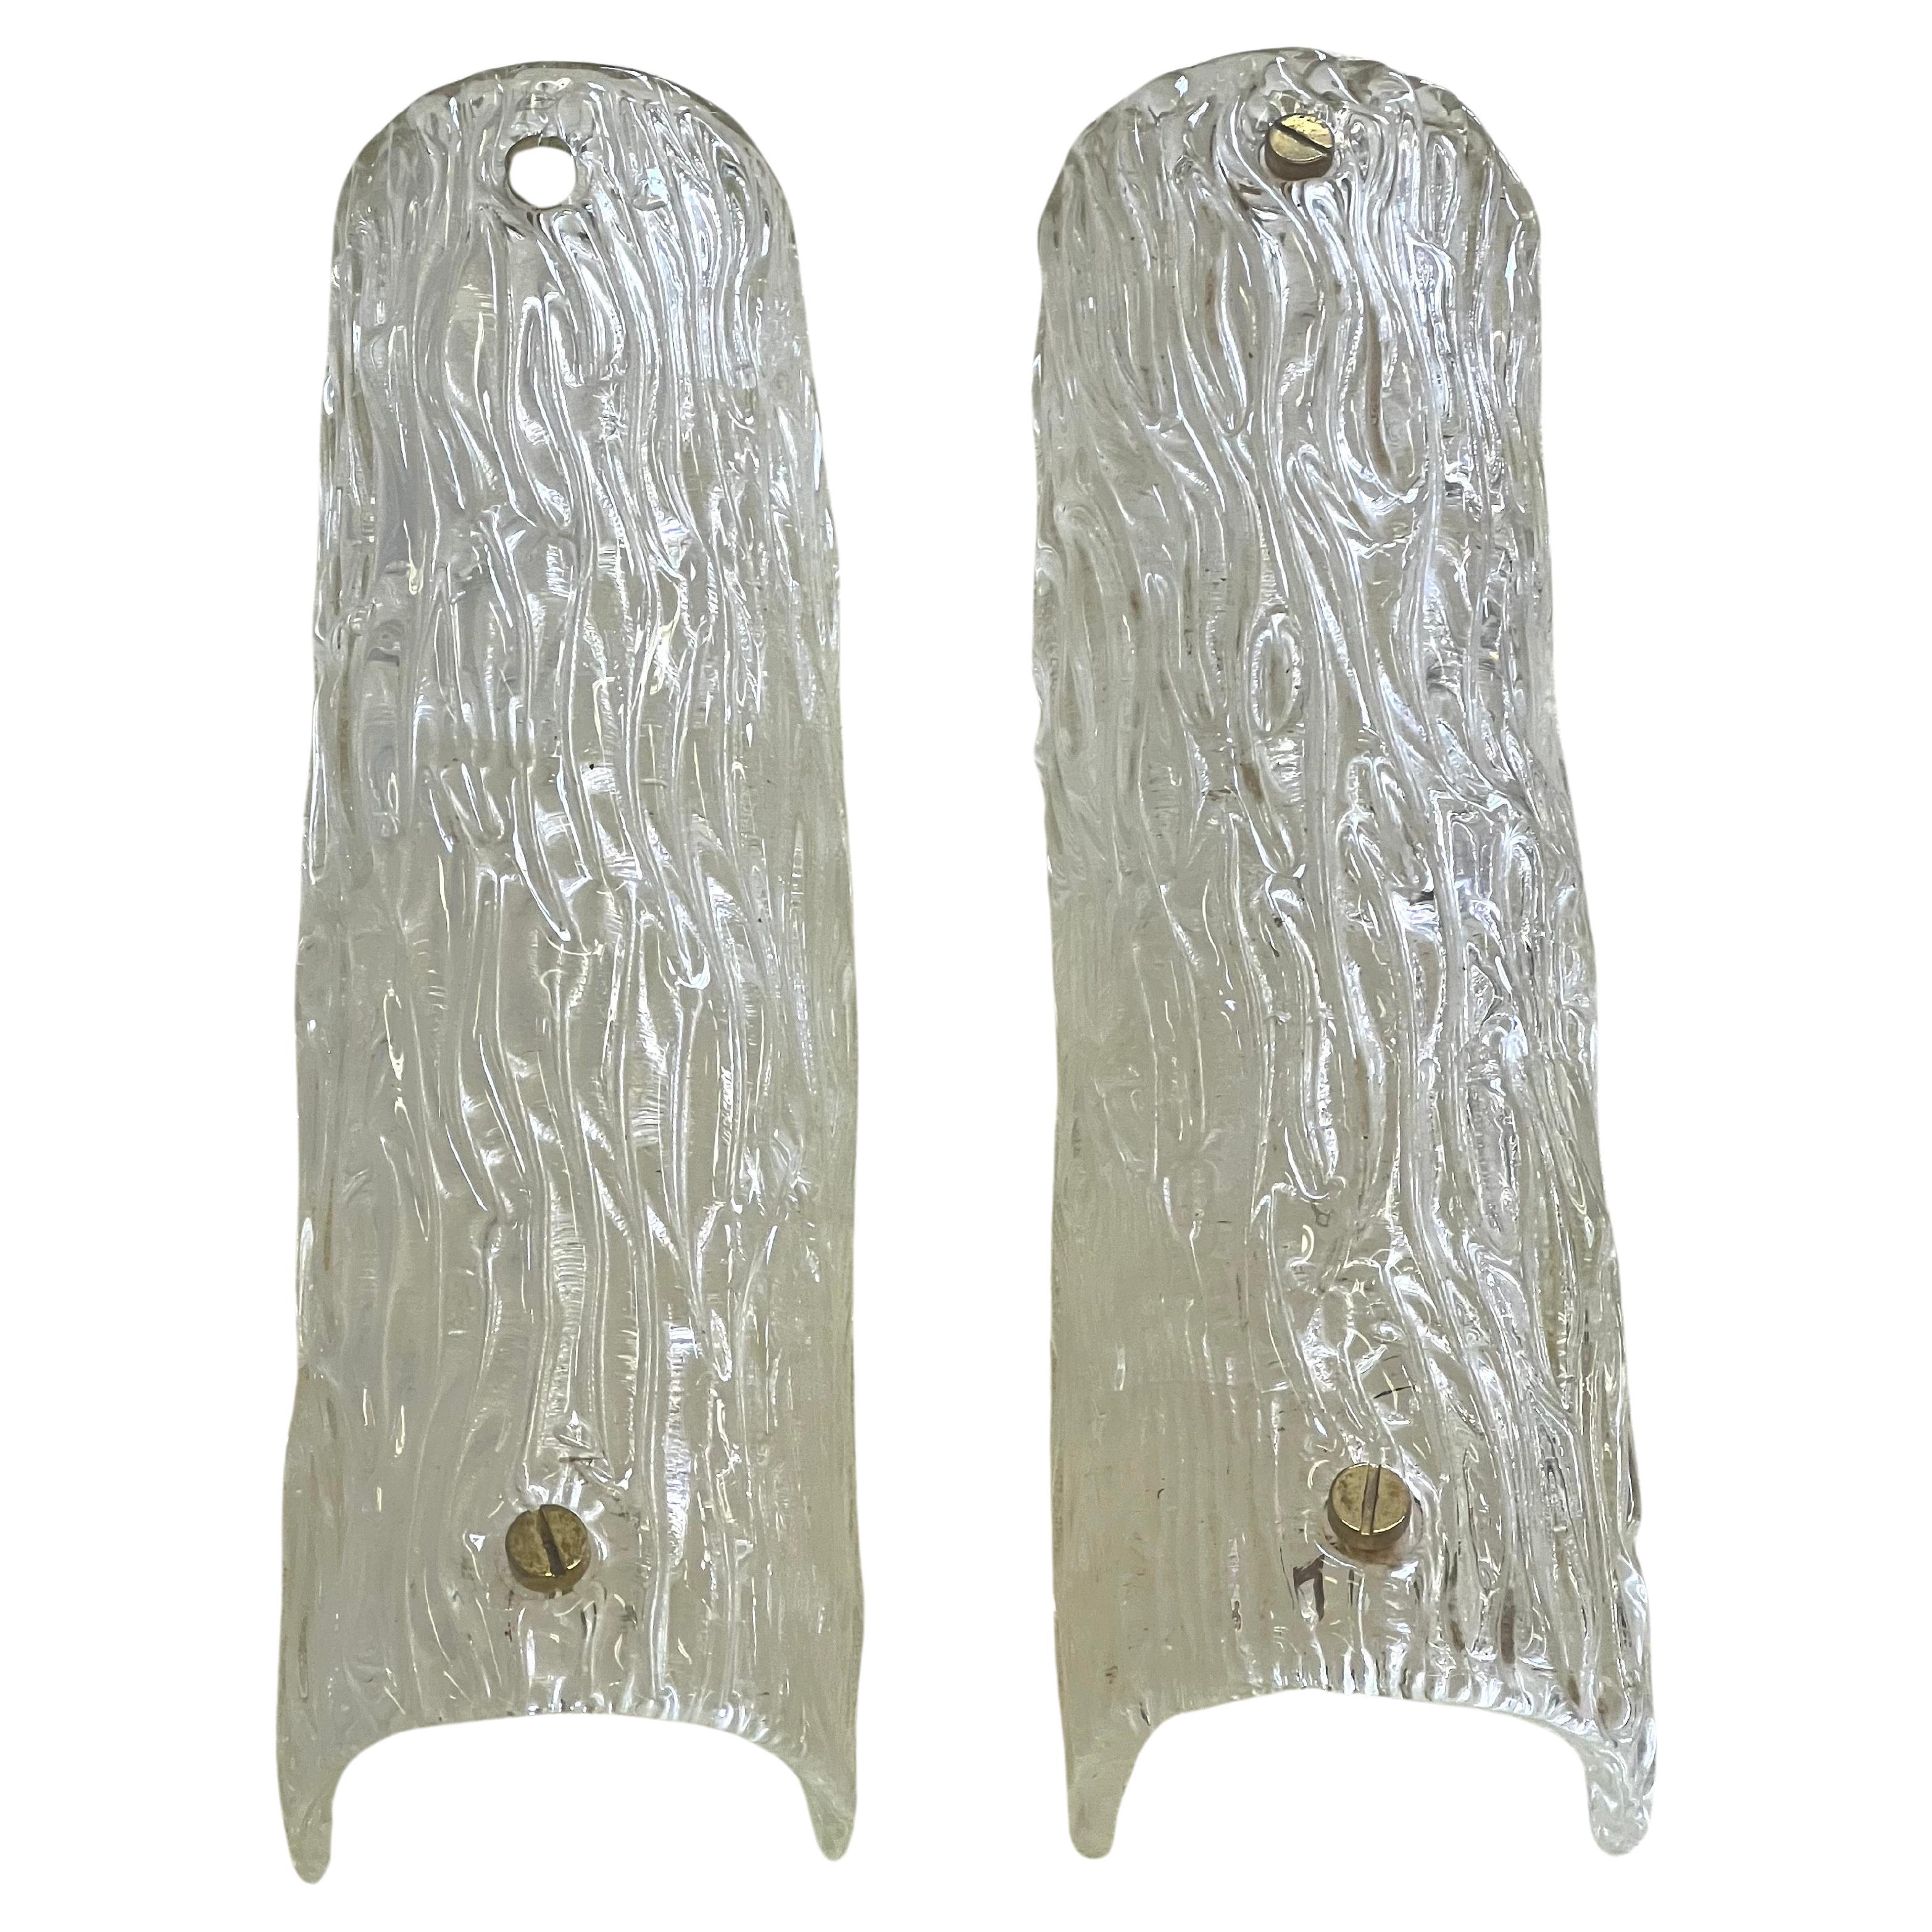 Pair of Large Italian Mid-century Murano Glass "Bambu" Wall Sconces by Venini For Sale